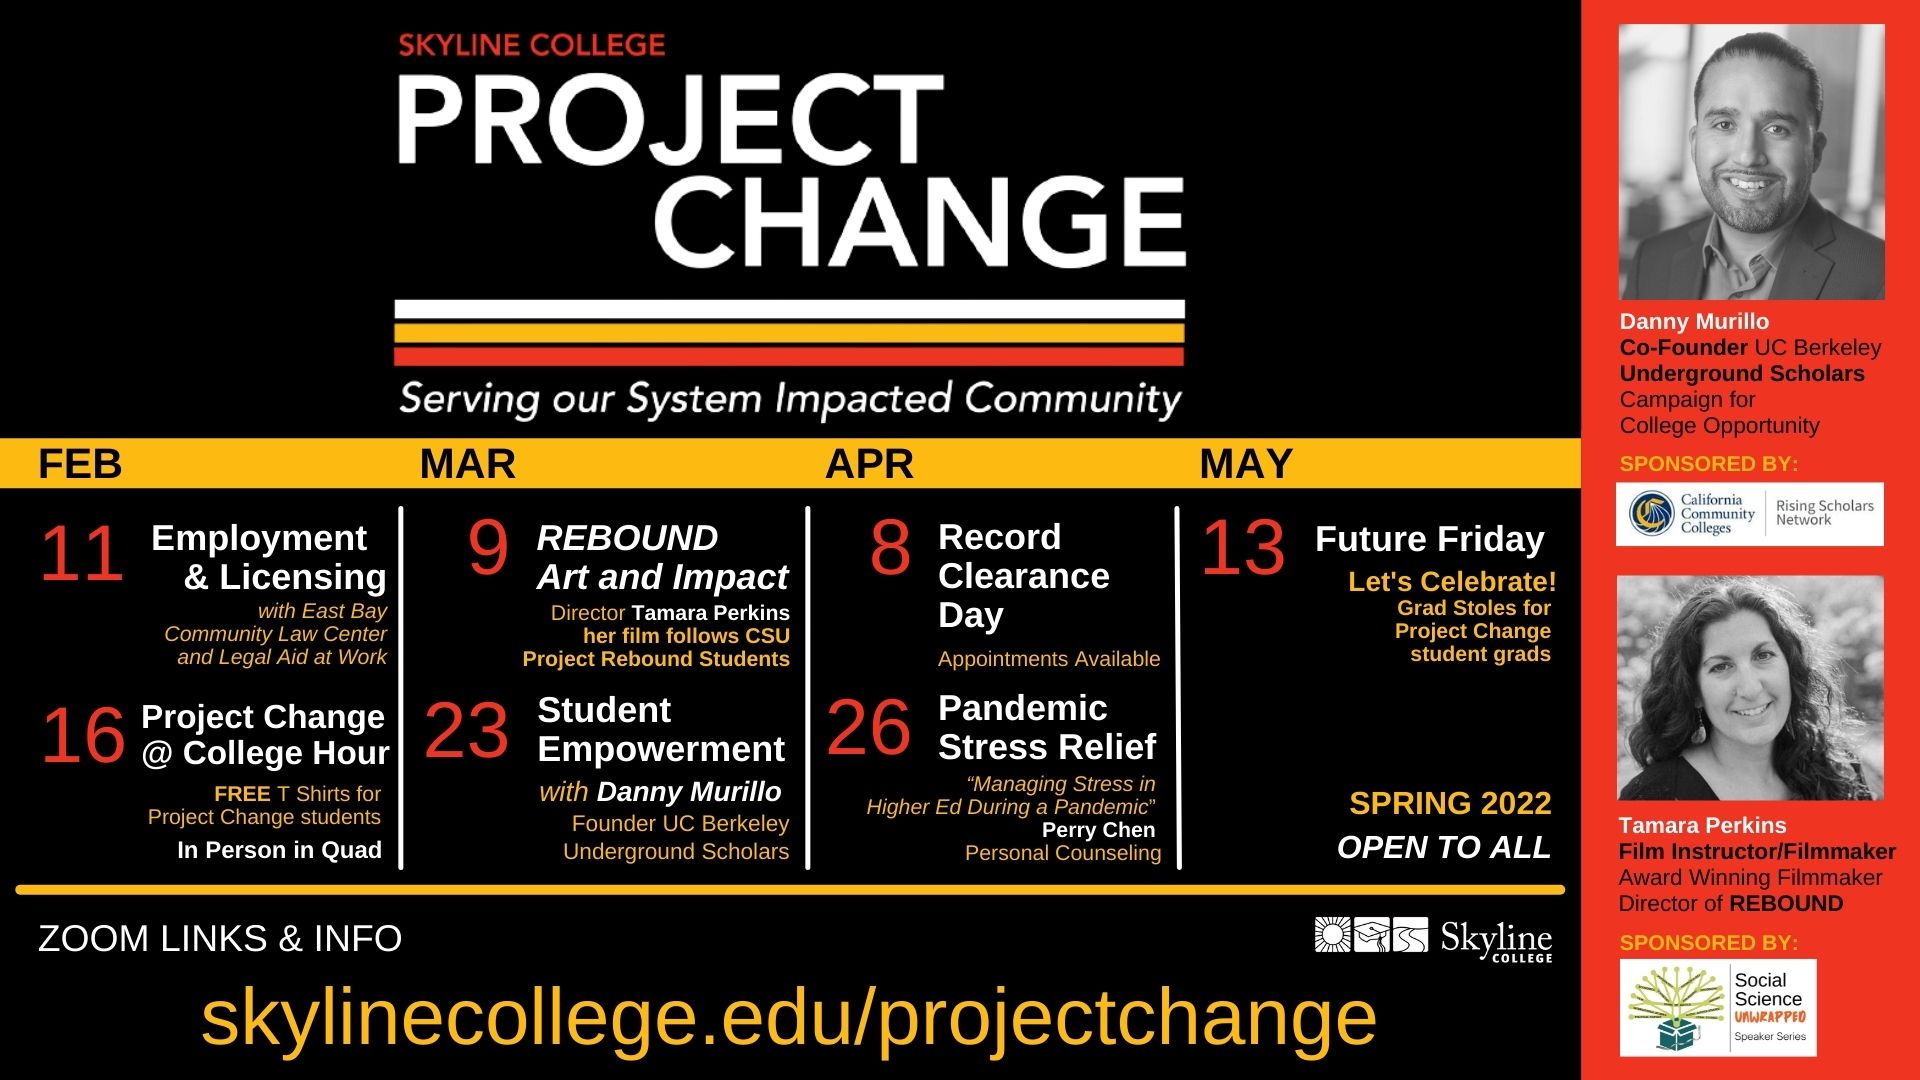 PROJECT CHANGE SPRING 2022 EVENTS